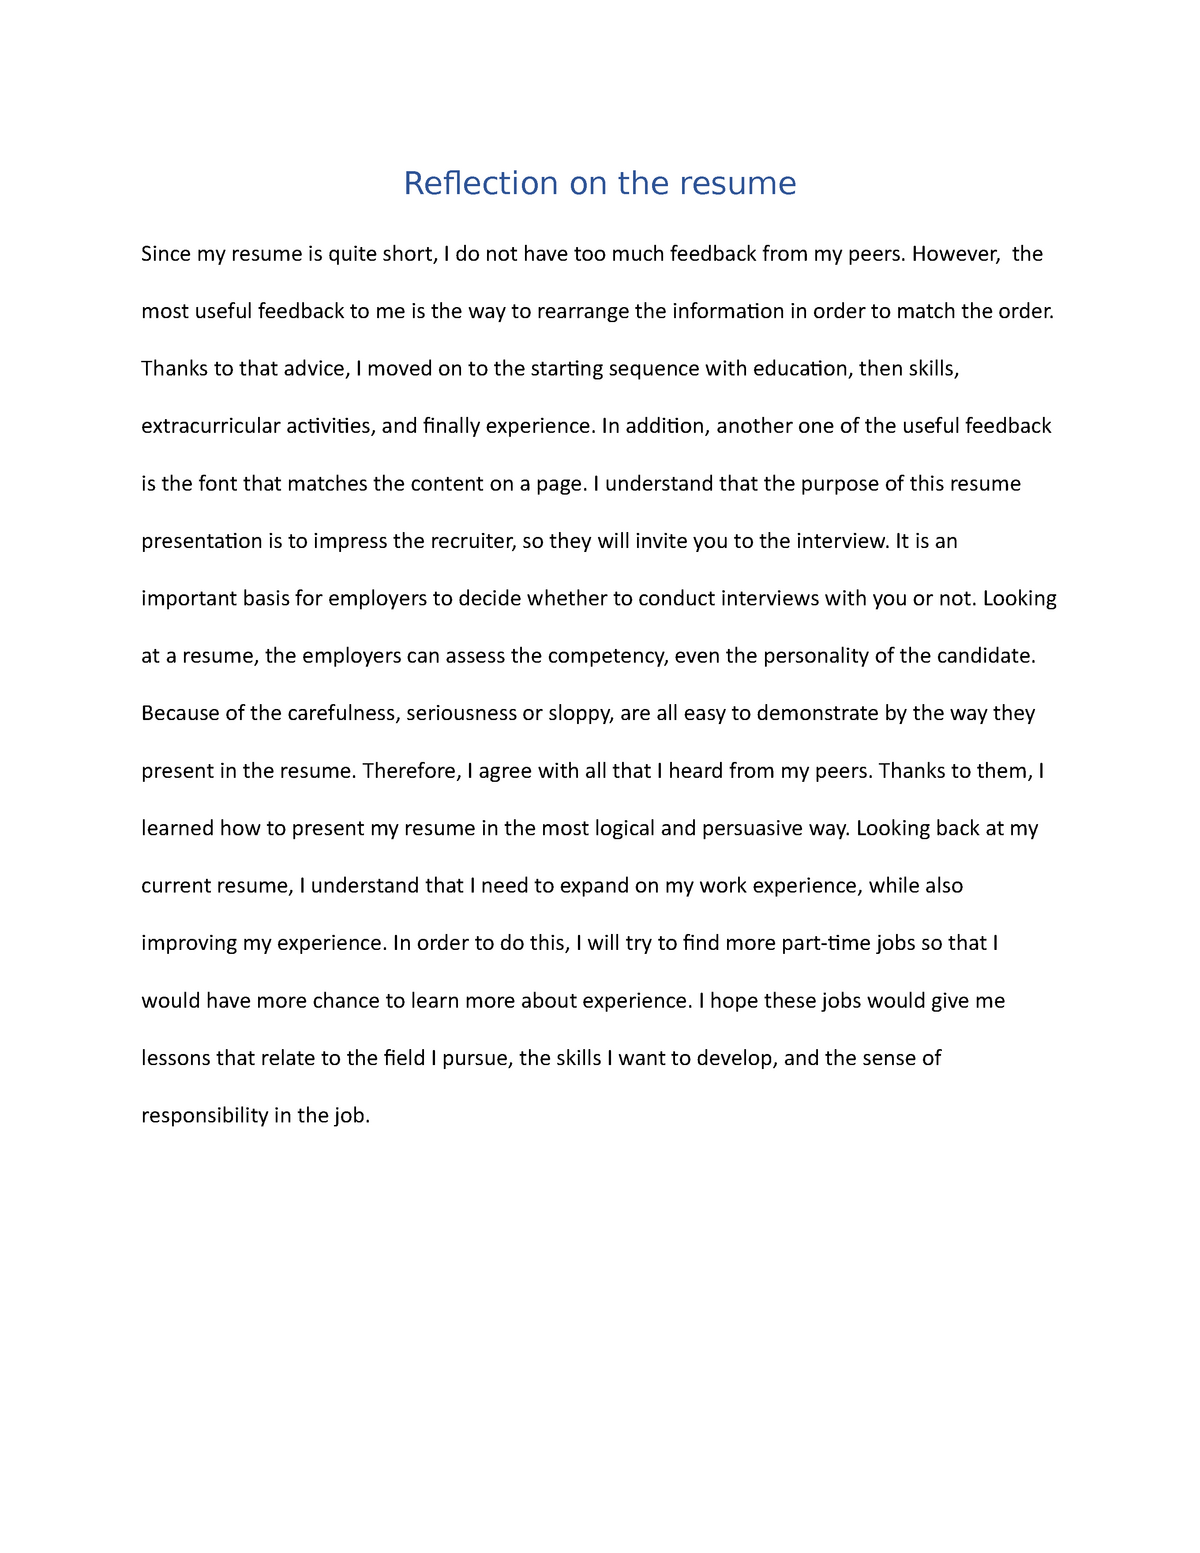 reflection paper about resume writing